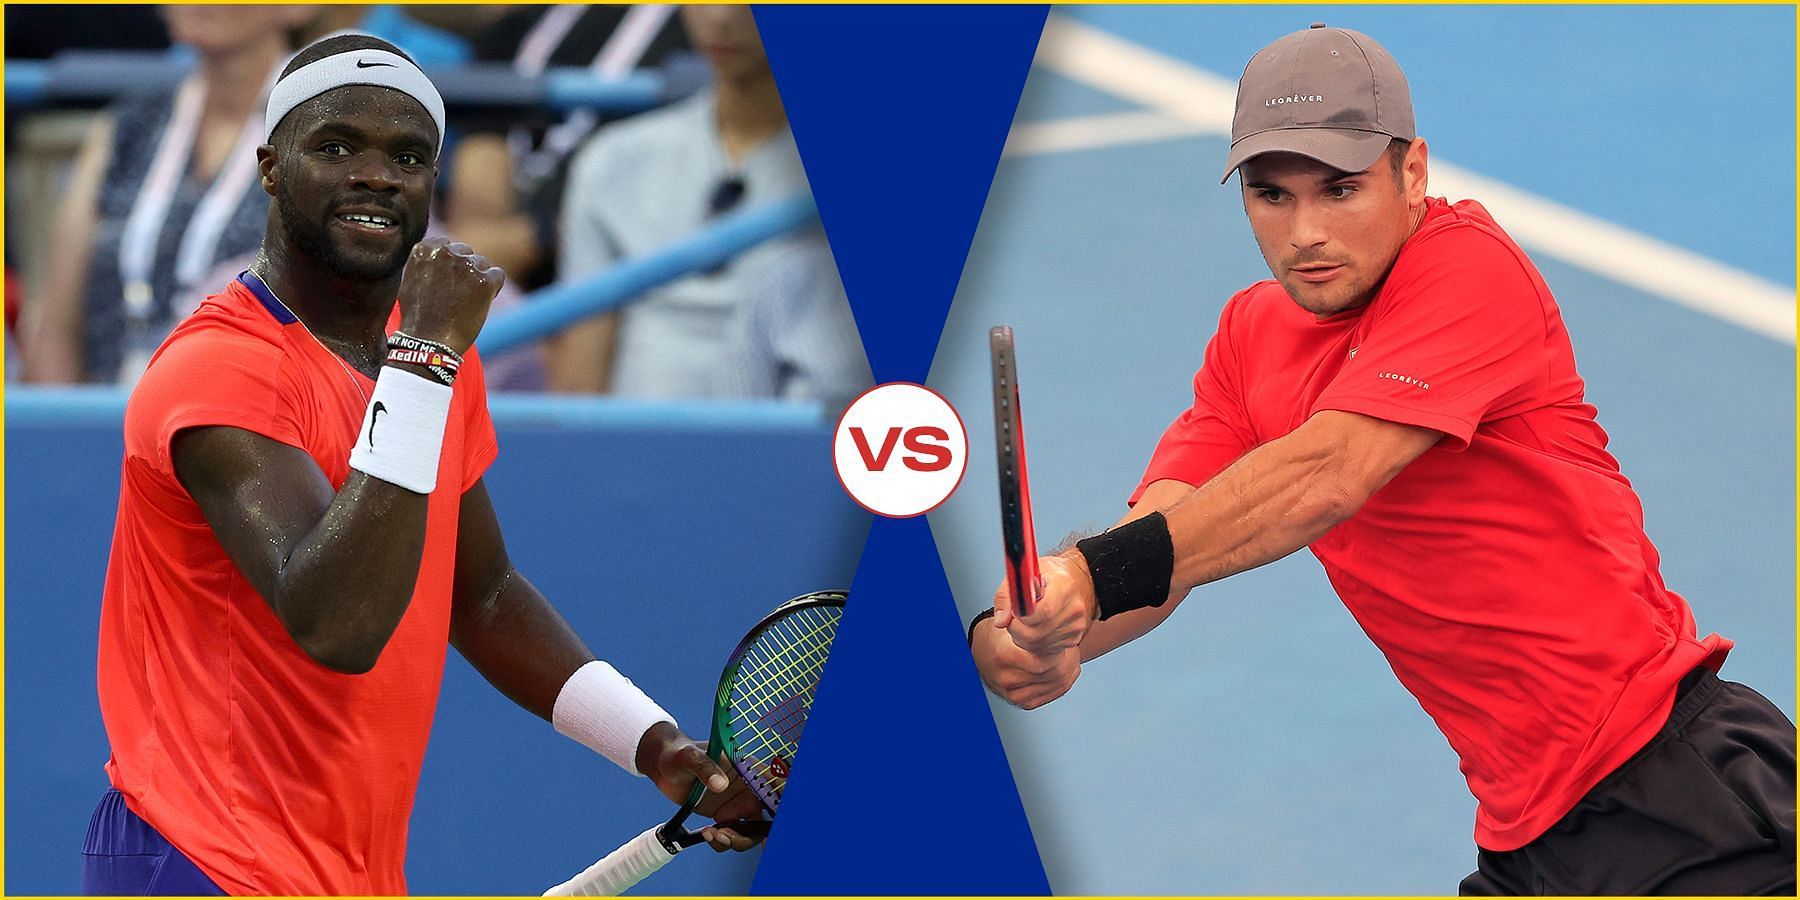 US Open 2022: Frances Tiafoe vs Marcos Giron preview, head-to-head, prediction, odds and pick